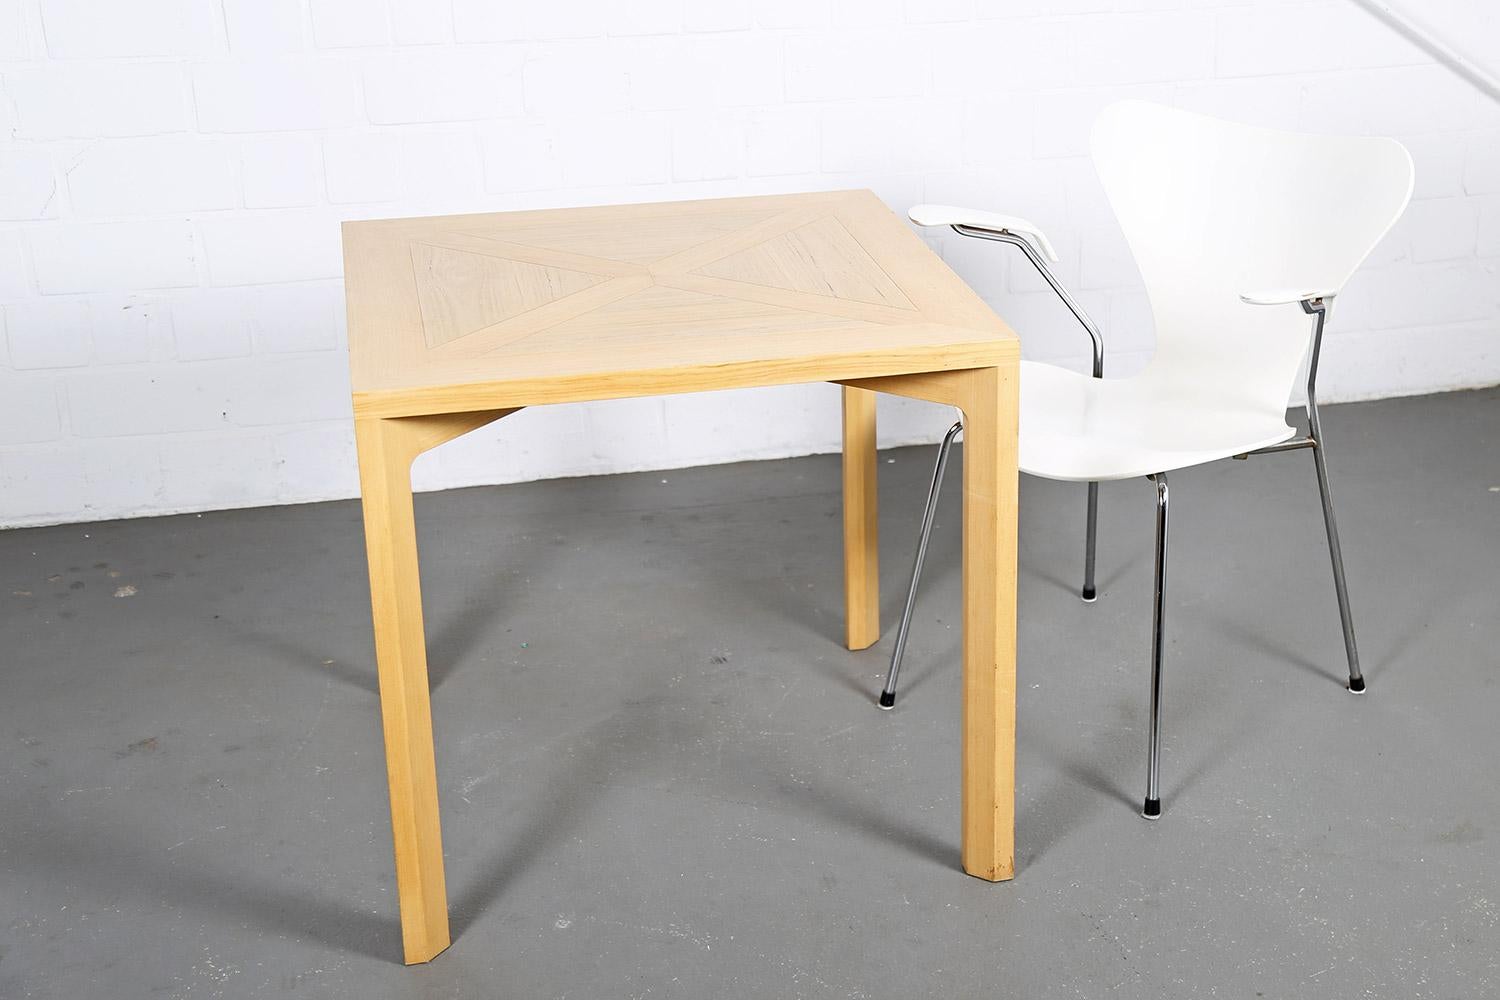 High coffee table or correspondingly low, small dining table (height approx. 68 cm) model PK70 designed by Poul Kjærholm for PP Møbler in 1978. The beautifully crafted ash wood table is one of Poul Kjærholms rare wooden designs.

Condition: see